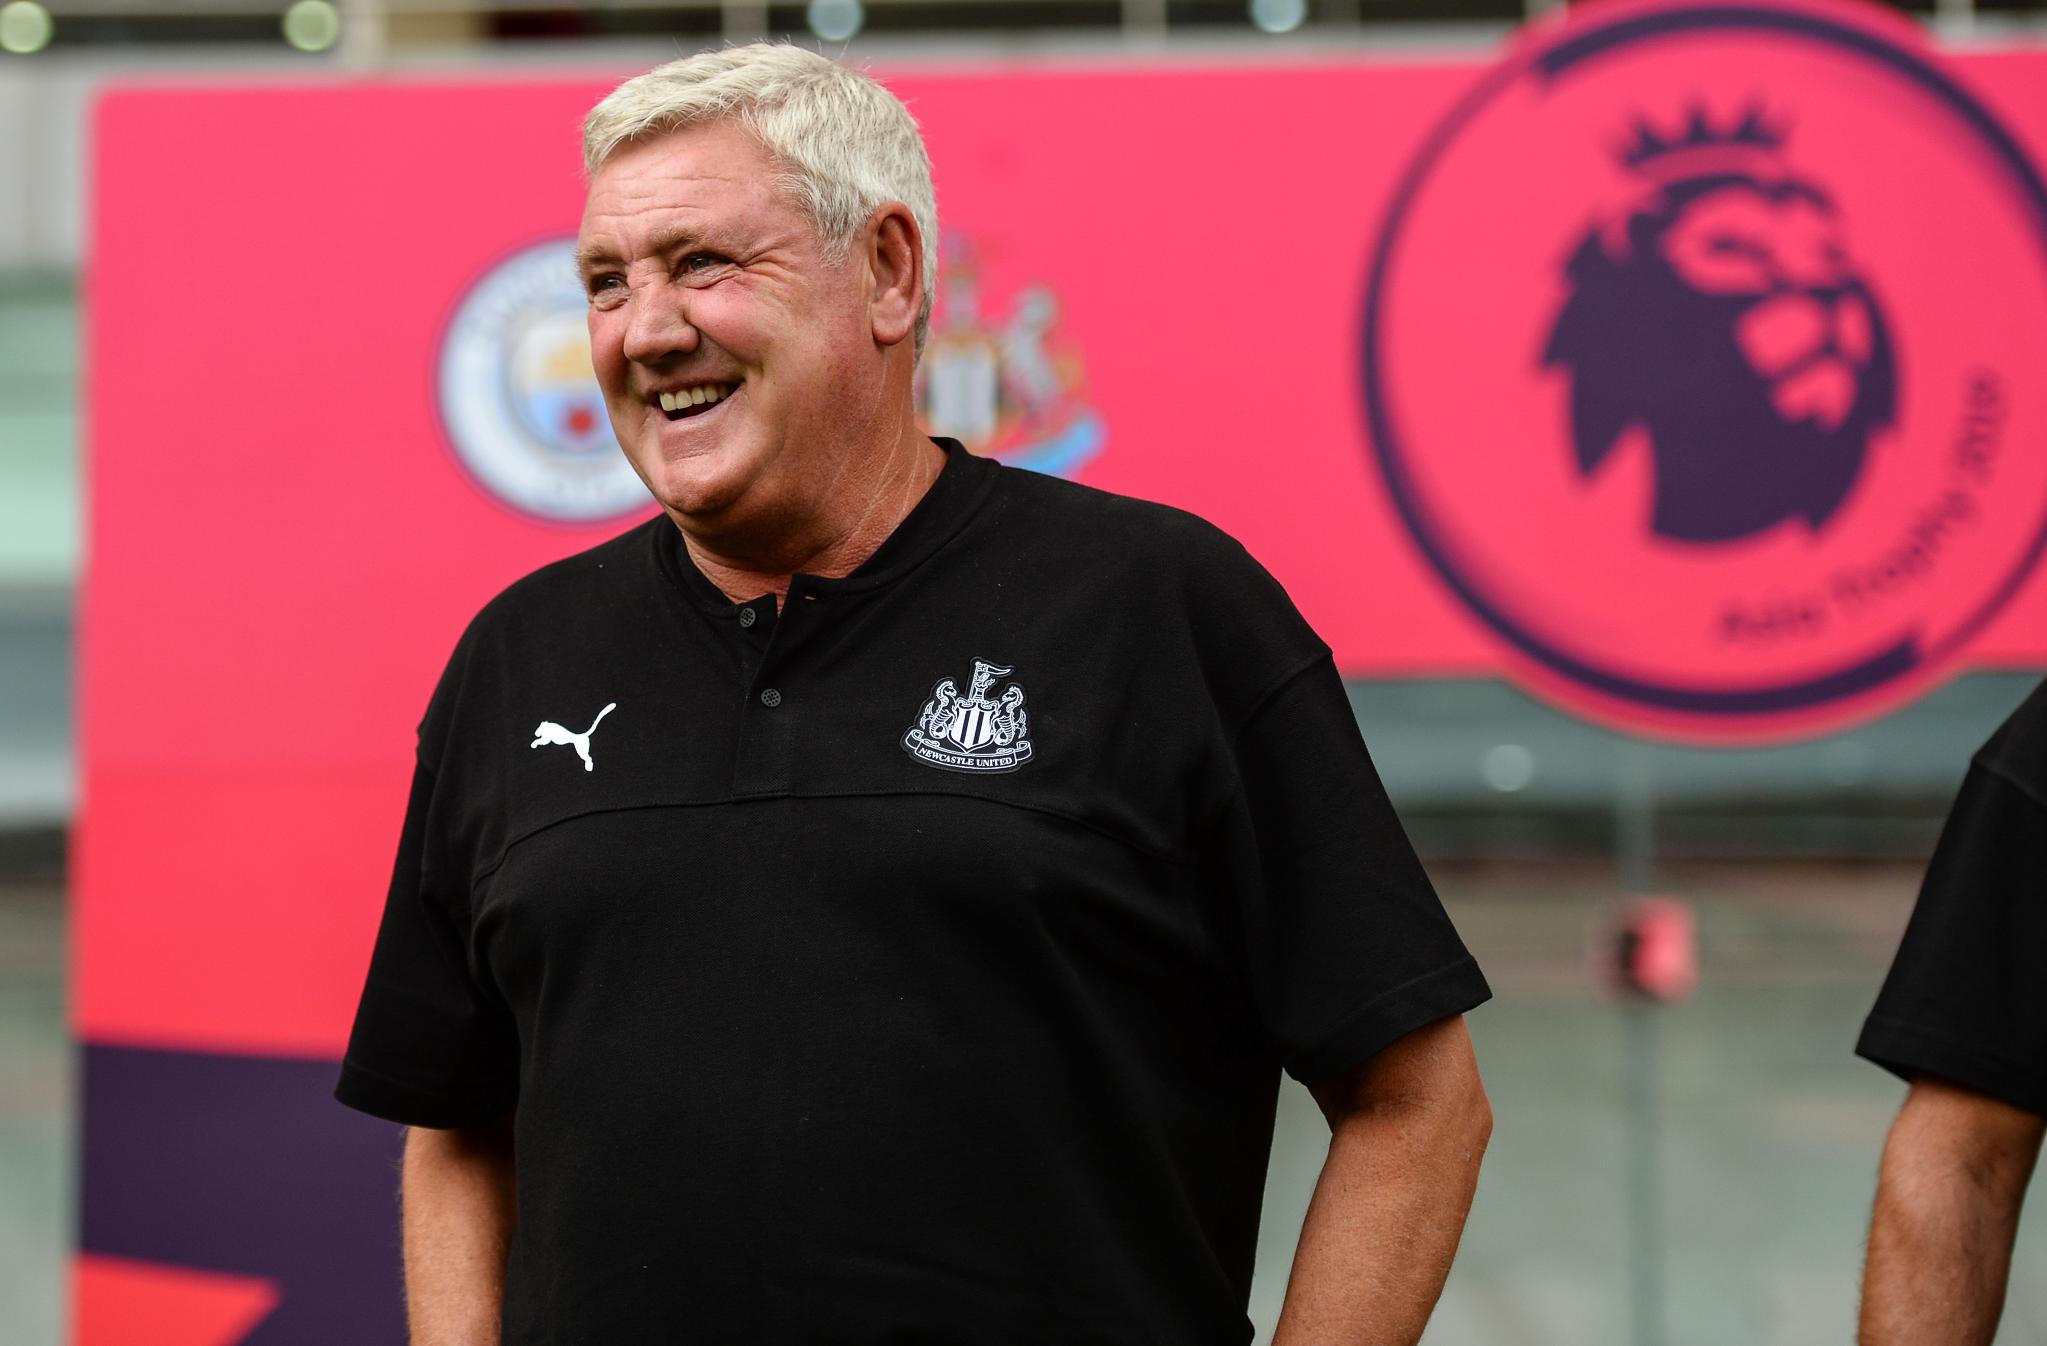 Steve Bruce leaves Newcastle by mutual consent following Saudi takeover